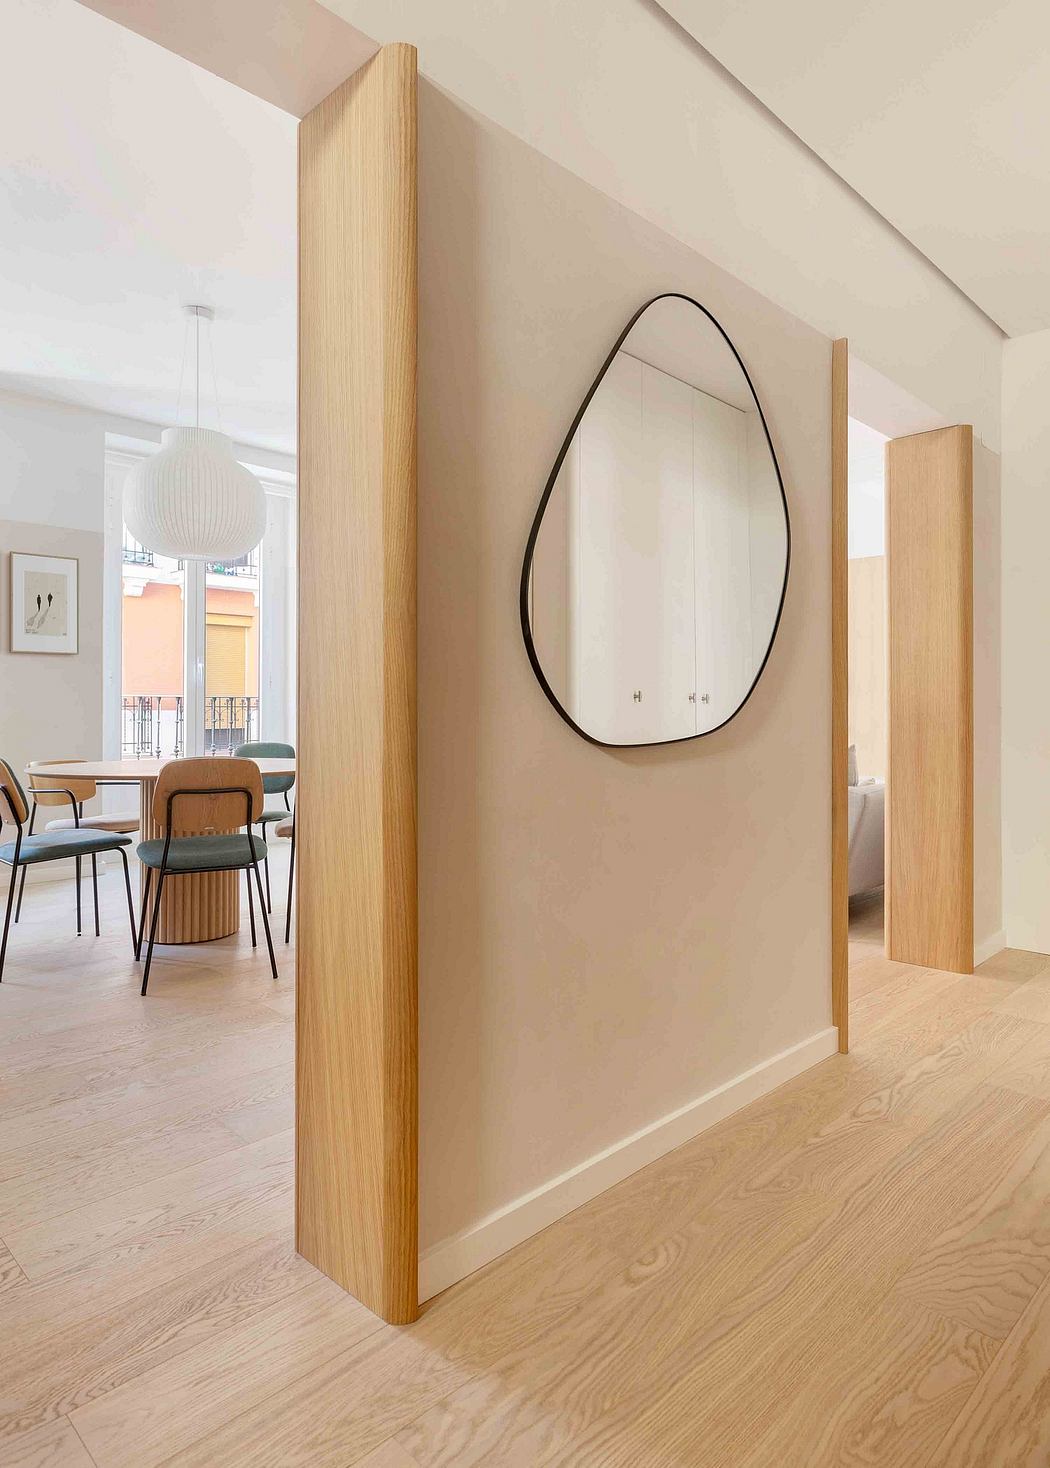 Striking architectural features, including a curvilinear mirror and wood columns, complement the minimalist decor.